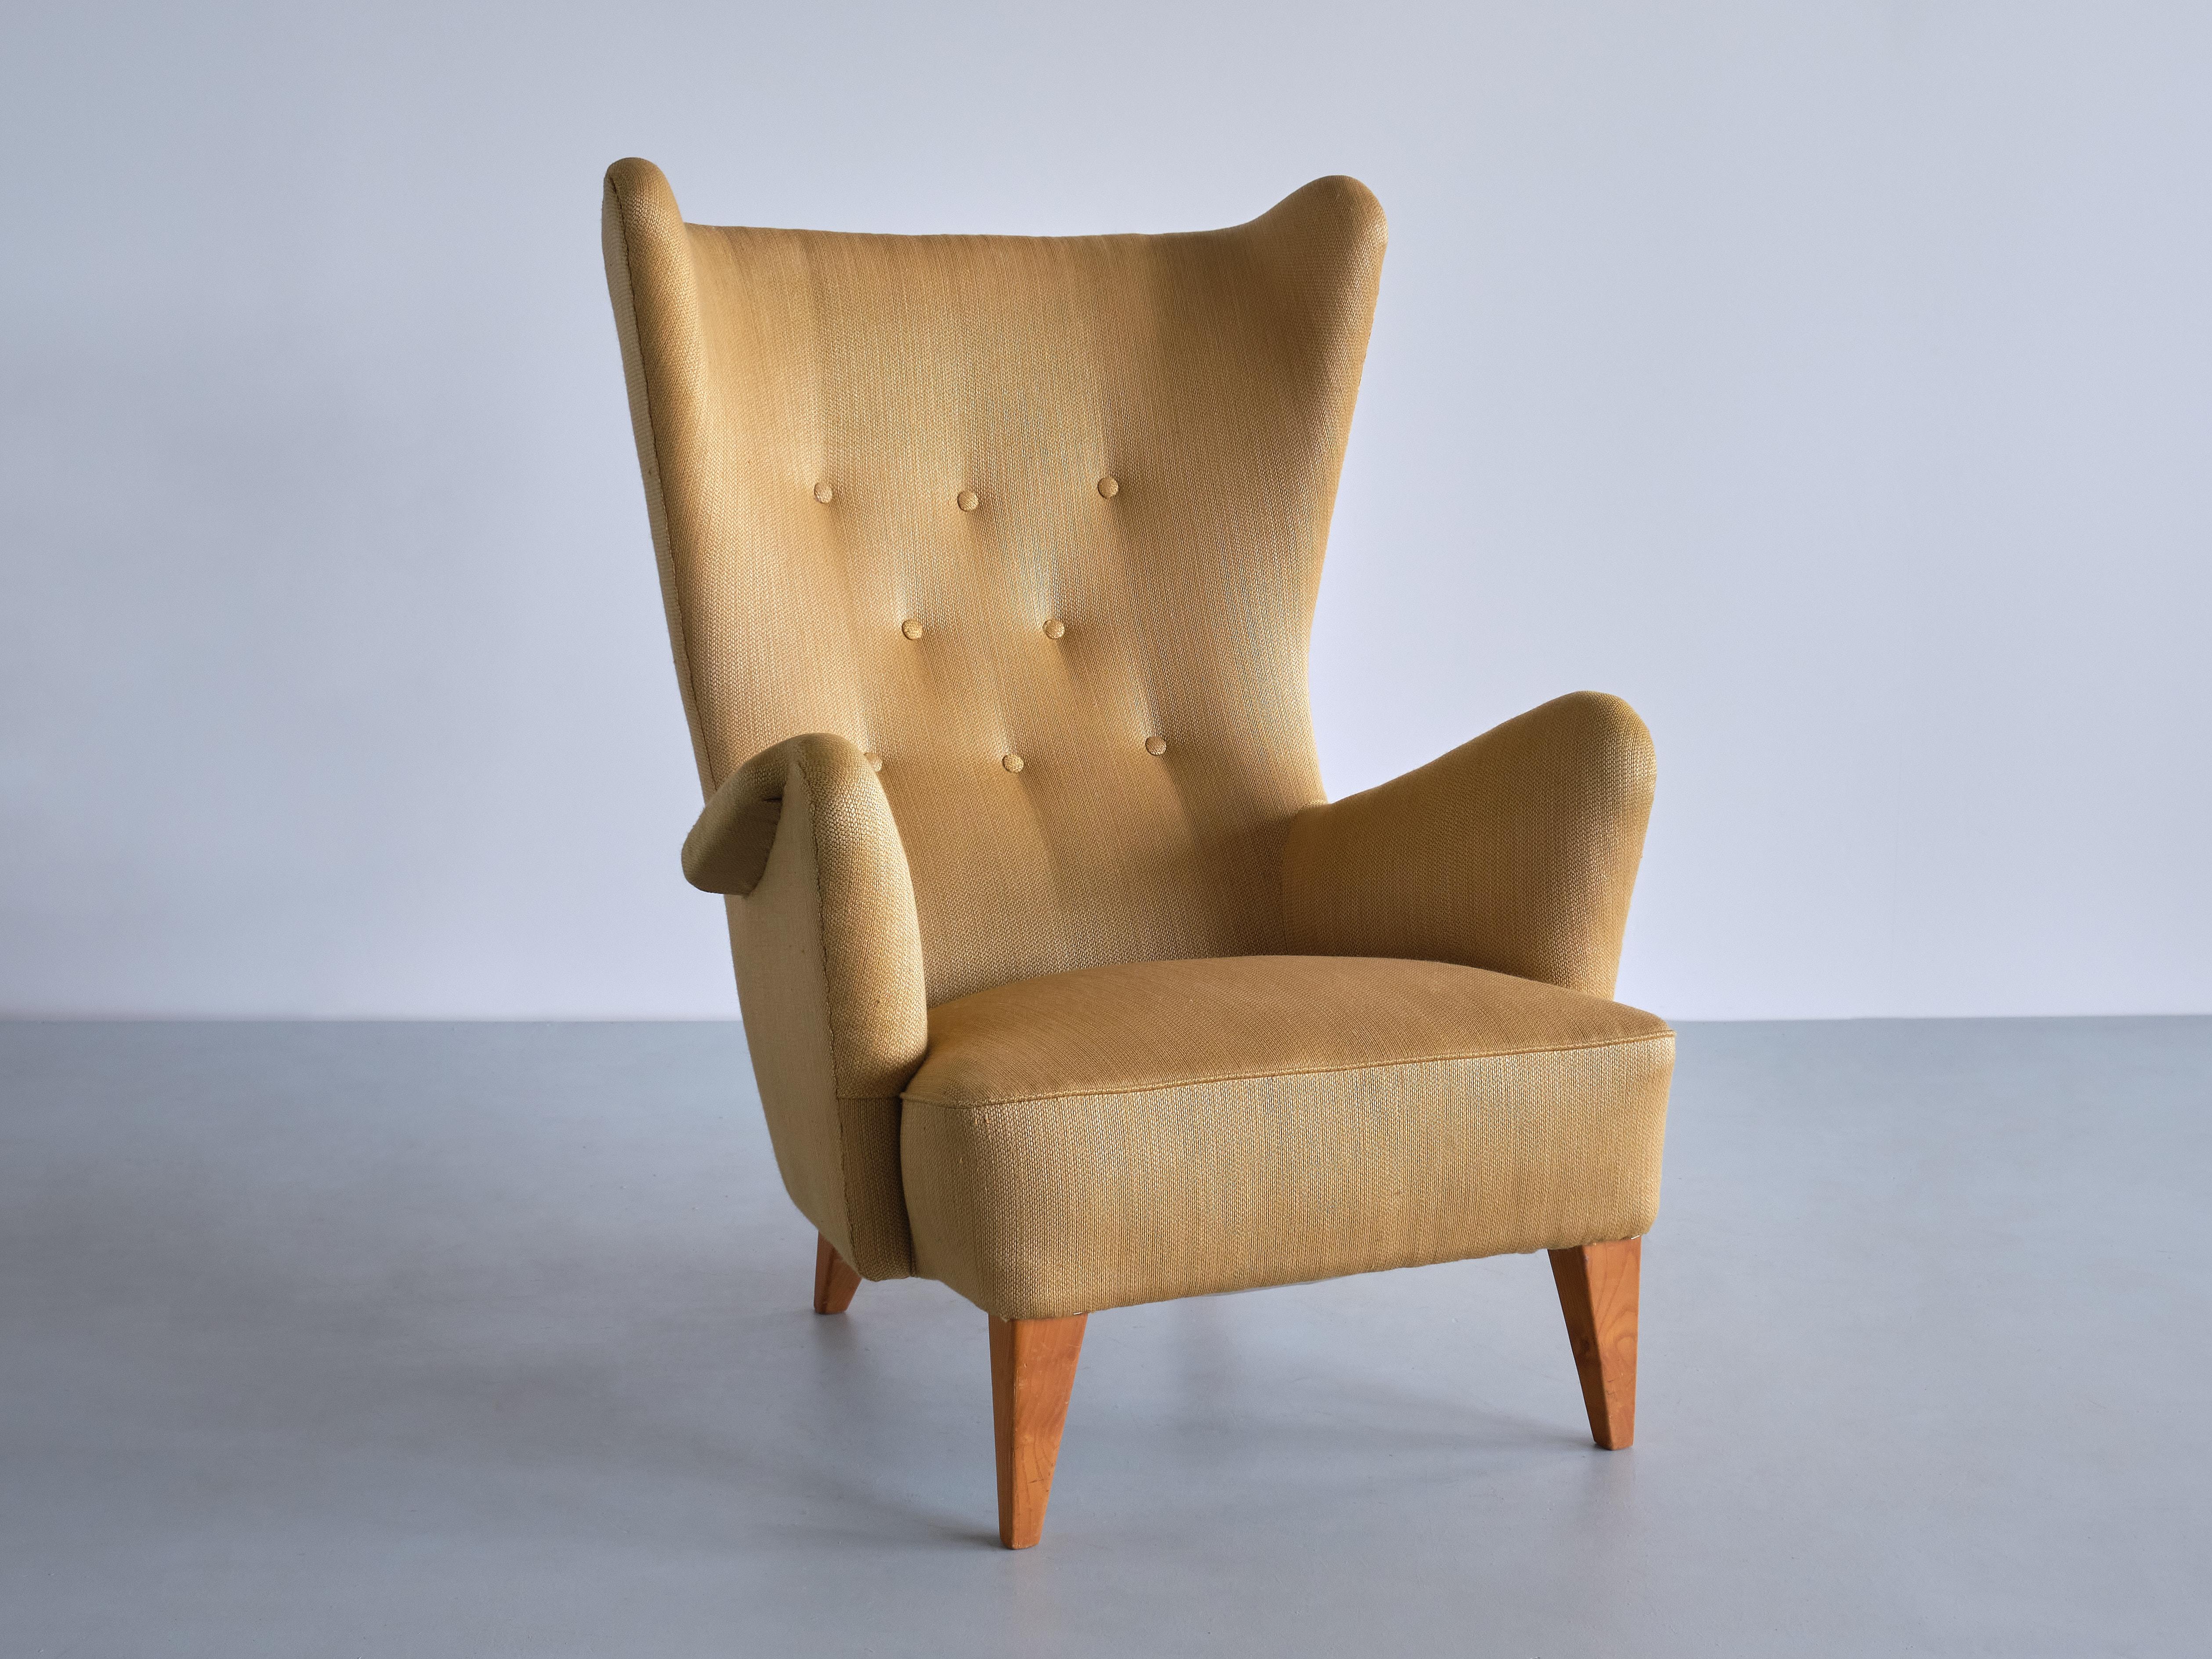 This rare wingback chair was produced in Sweden in the late 1940s. The design is attributed to Gustaf Axel Berg. The chair is documented in a 1950 advertisement of the upscale department store Wessels in Malmö.

The elegant organic lines of the